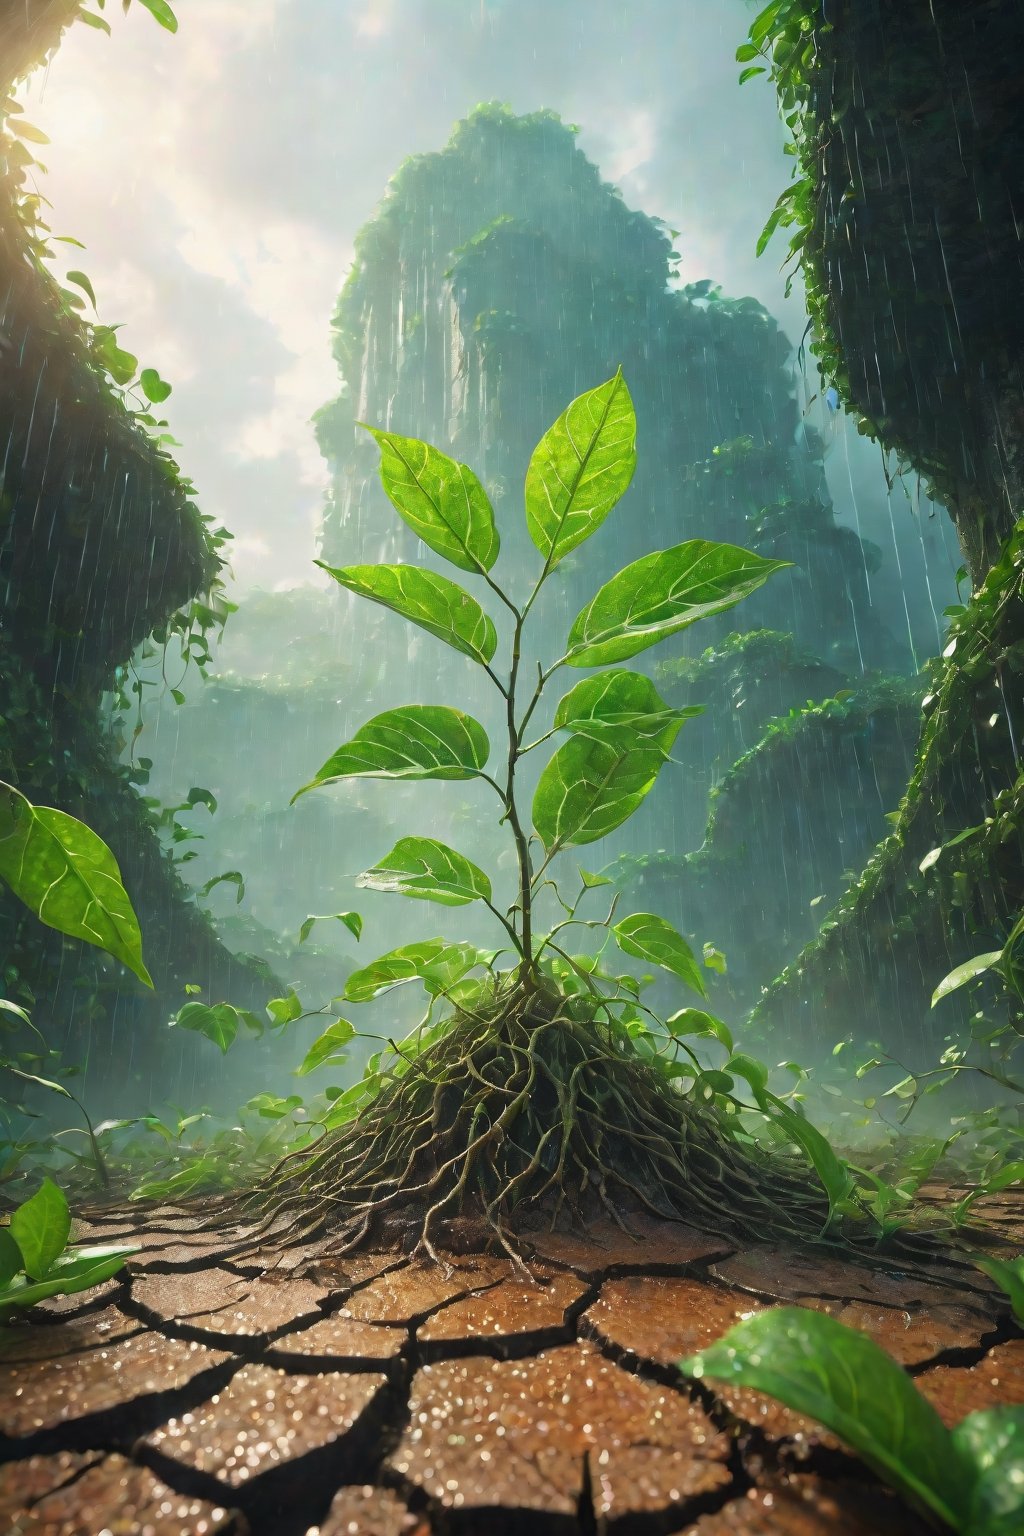 Growing green plant bursting from cracked earth, winding leaves reaching skyward, low angle view, vivid organic colors, intricate vine textures, rain-misted jungle in distance, surreal lighting, hyper realistic with anime influence, magical realism style, cinematic 32k ultra HD resolution, 3D rendering